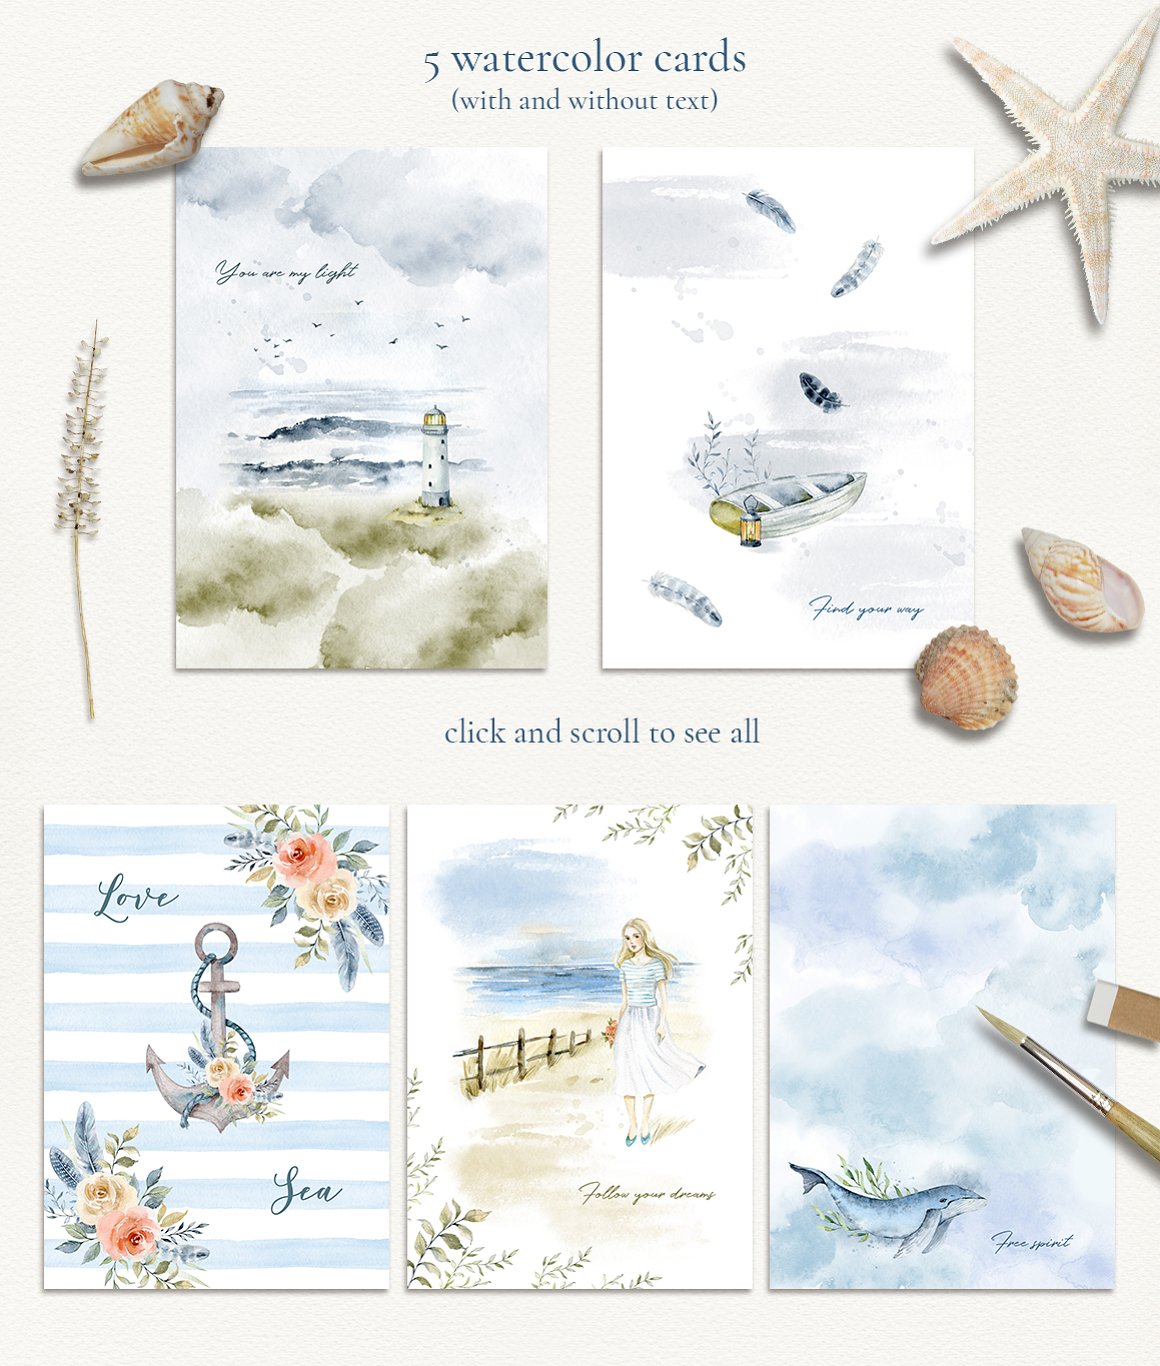 5 watercolor cards with sea illustrations.